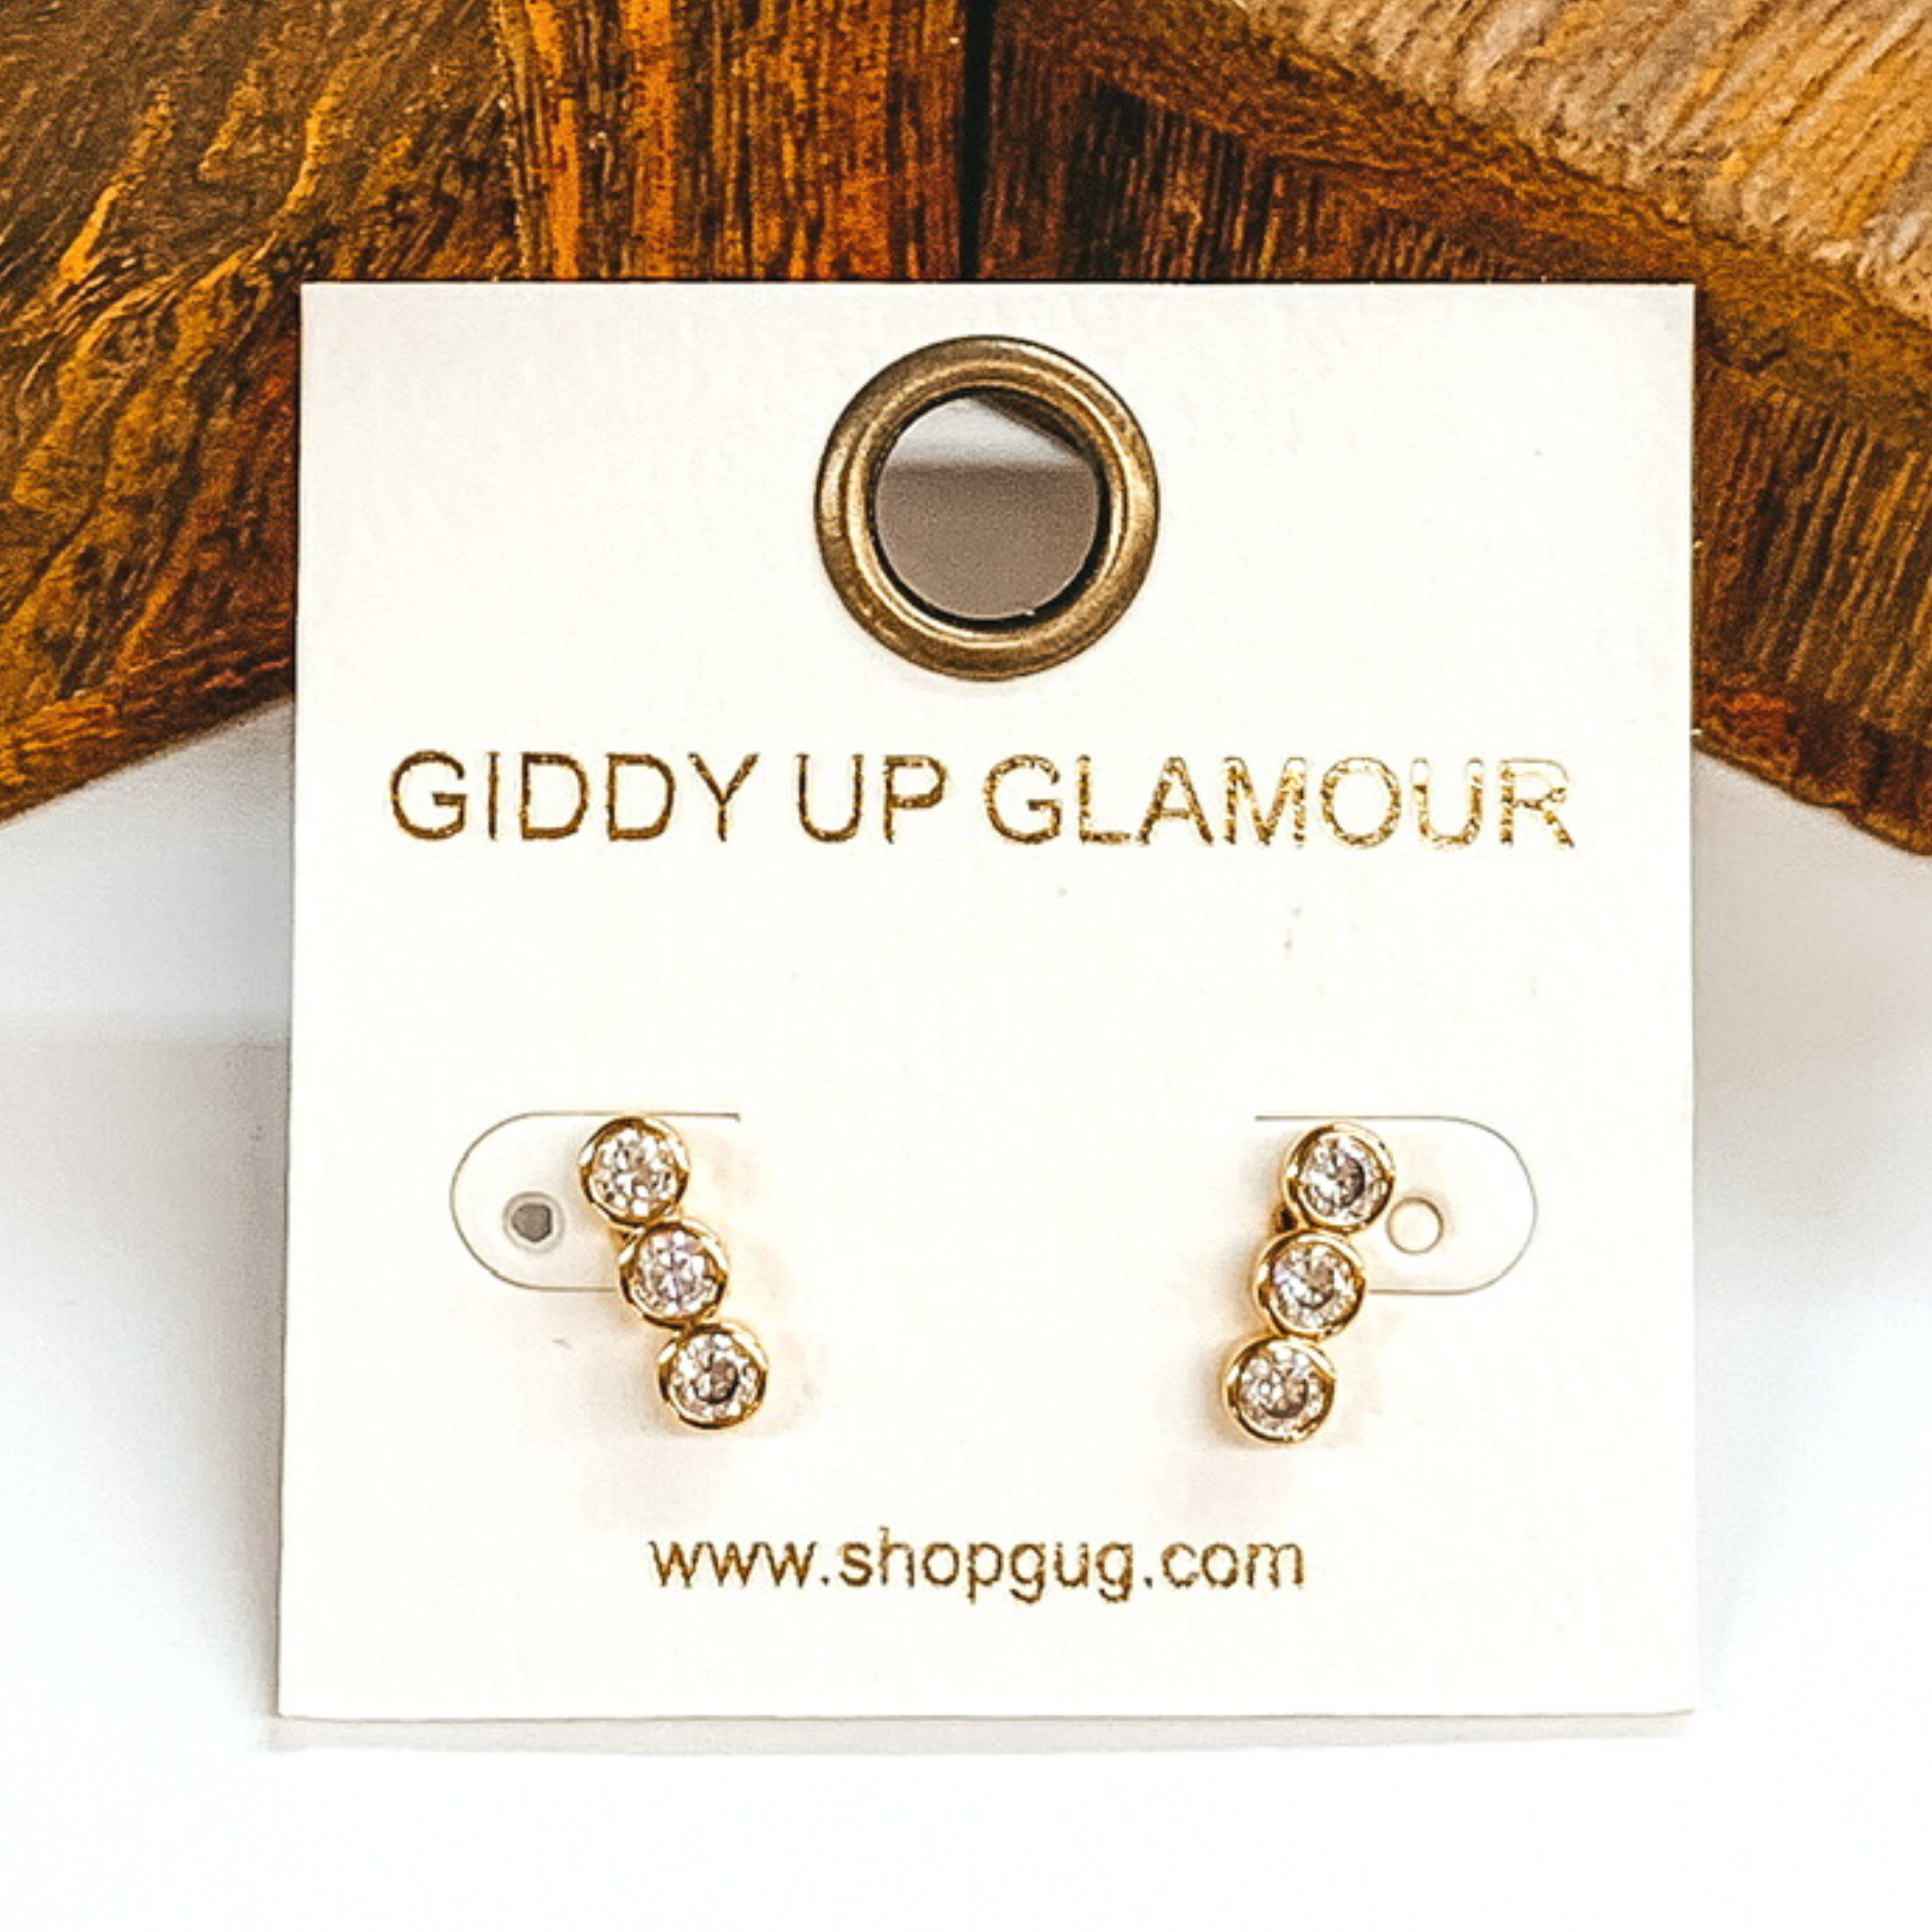 Small, silver circle stacked stud earrings with clear crystals. These earrings are pictured on a white earrings card on a white and brown background.